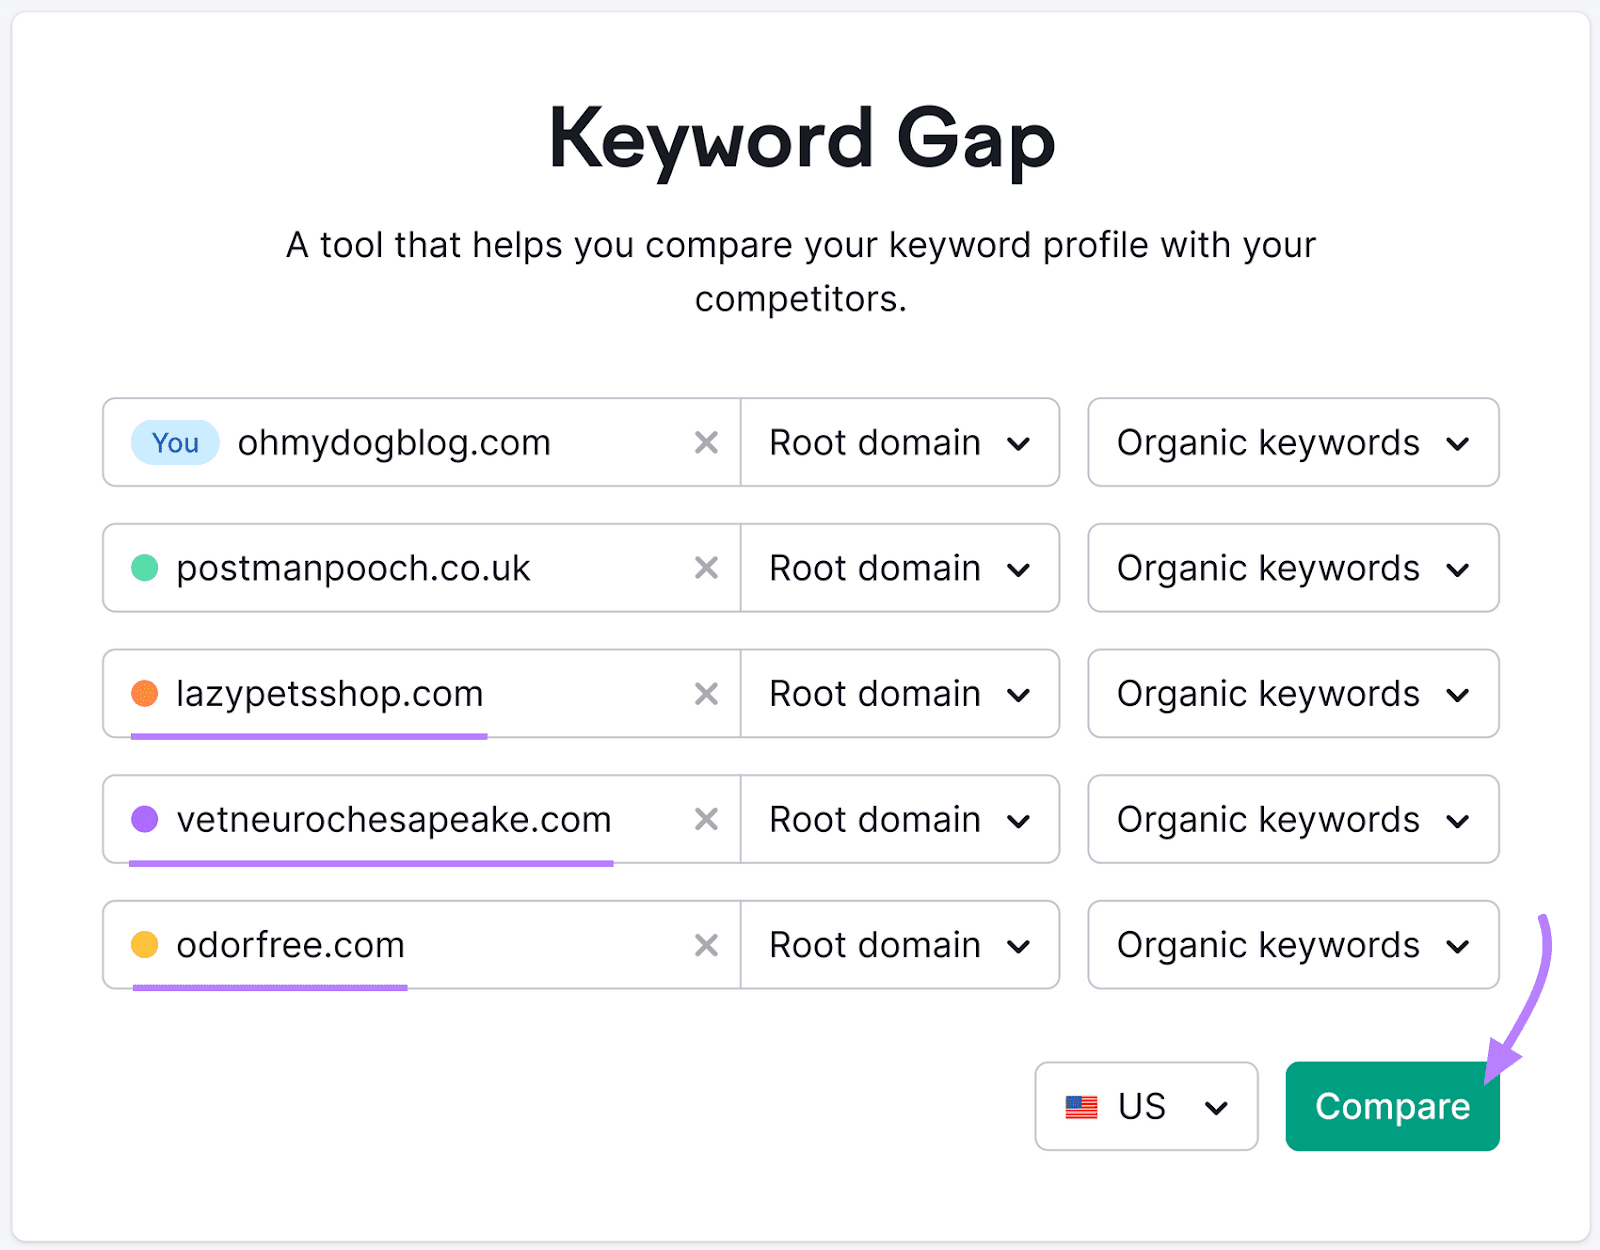 Keyword Gap instrumentality   hunt  interface, with "ohmydogblog.com" competitors' domains added